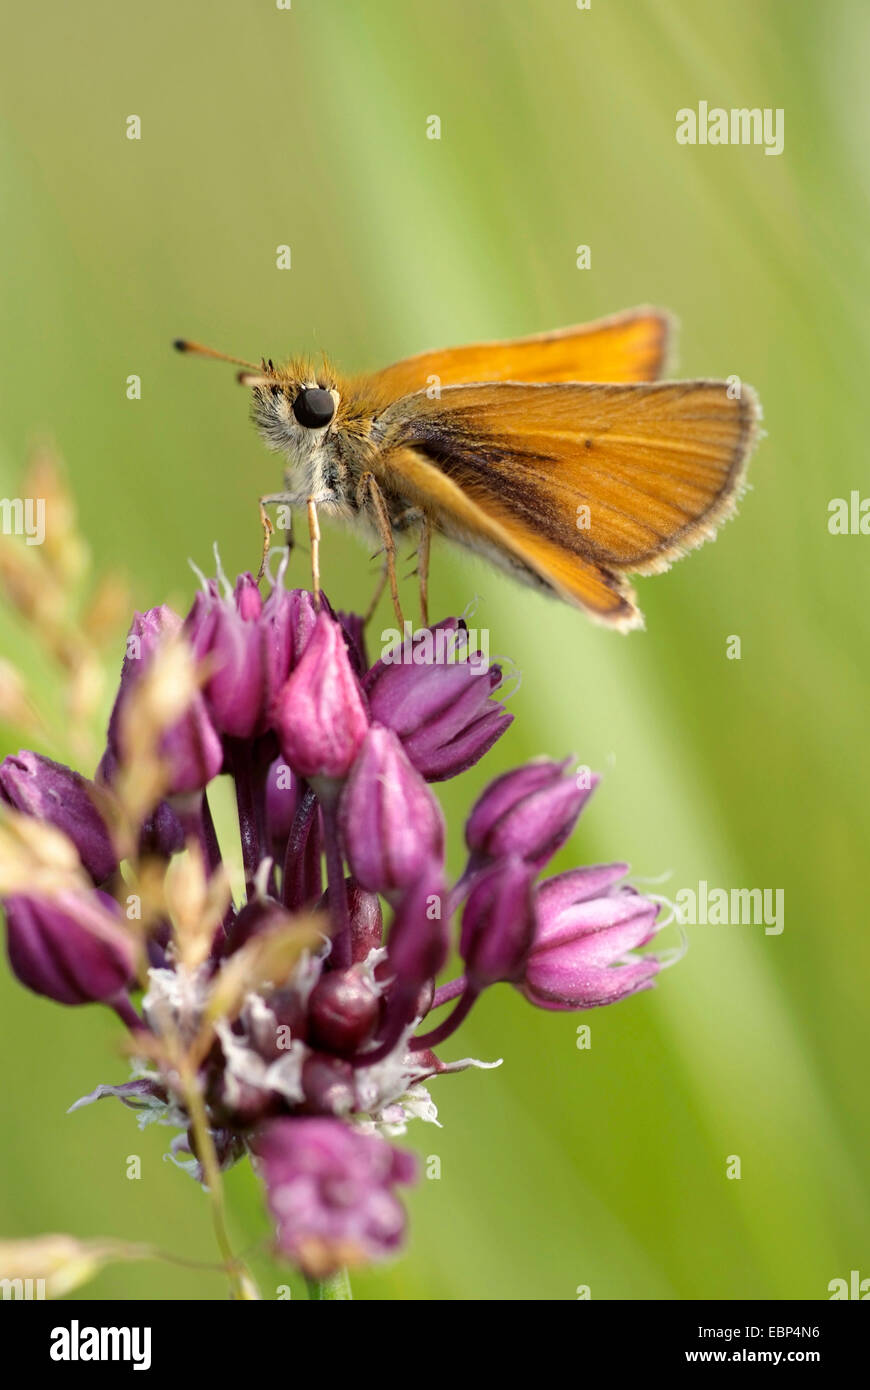 Essex skipper (Thymelicus lineolus, Thymelicus lineola), on lilac flowers, Germany Stock Photo